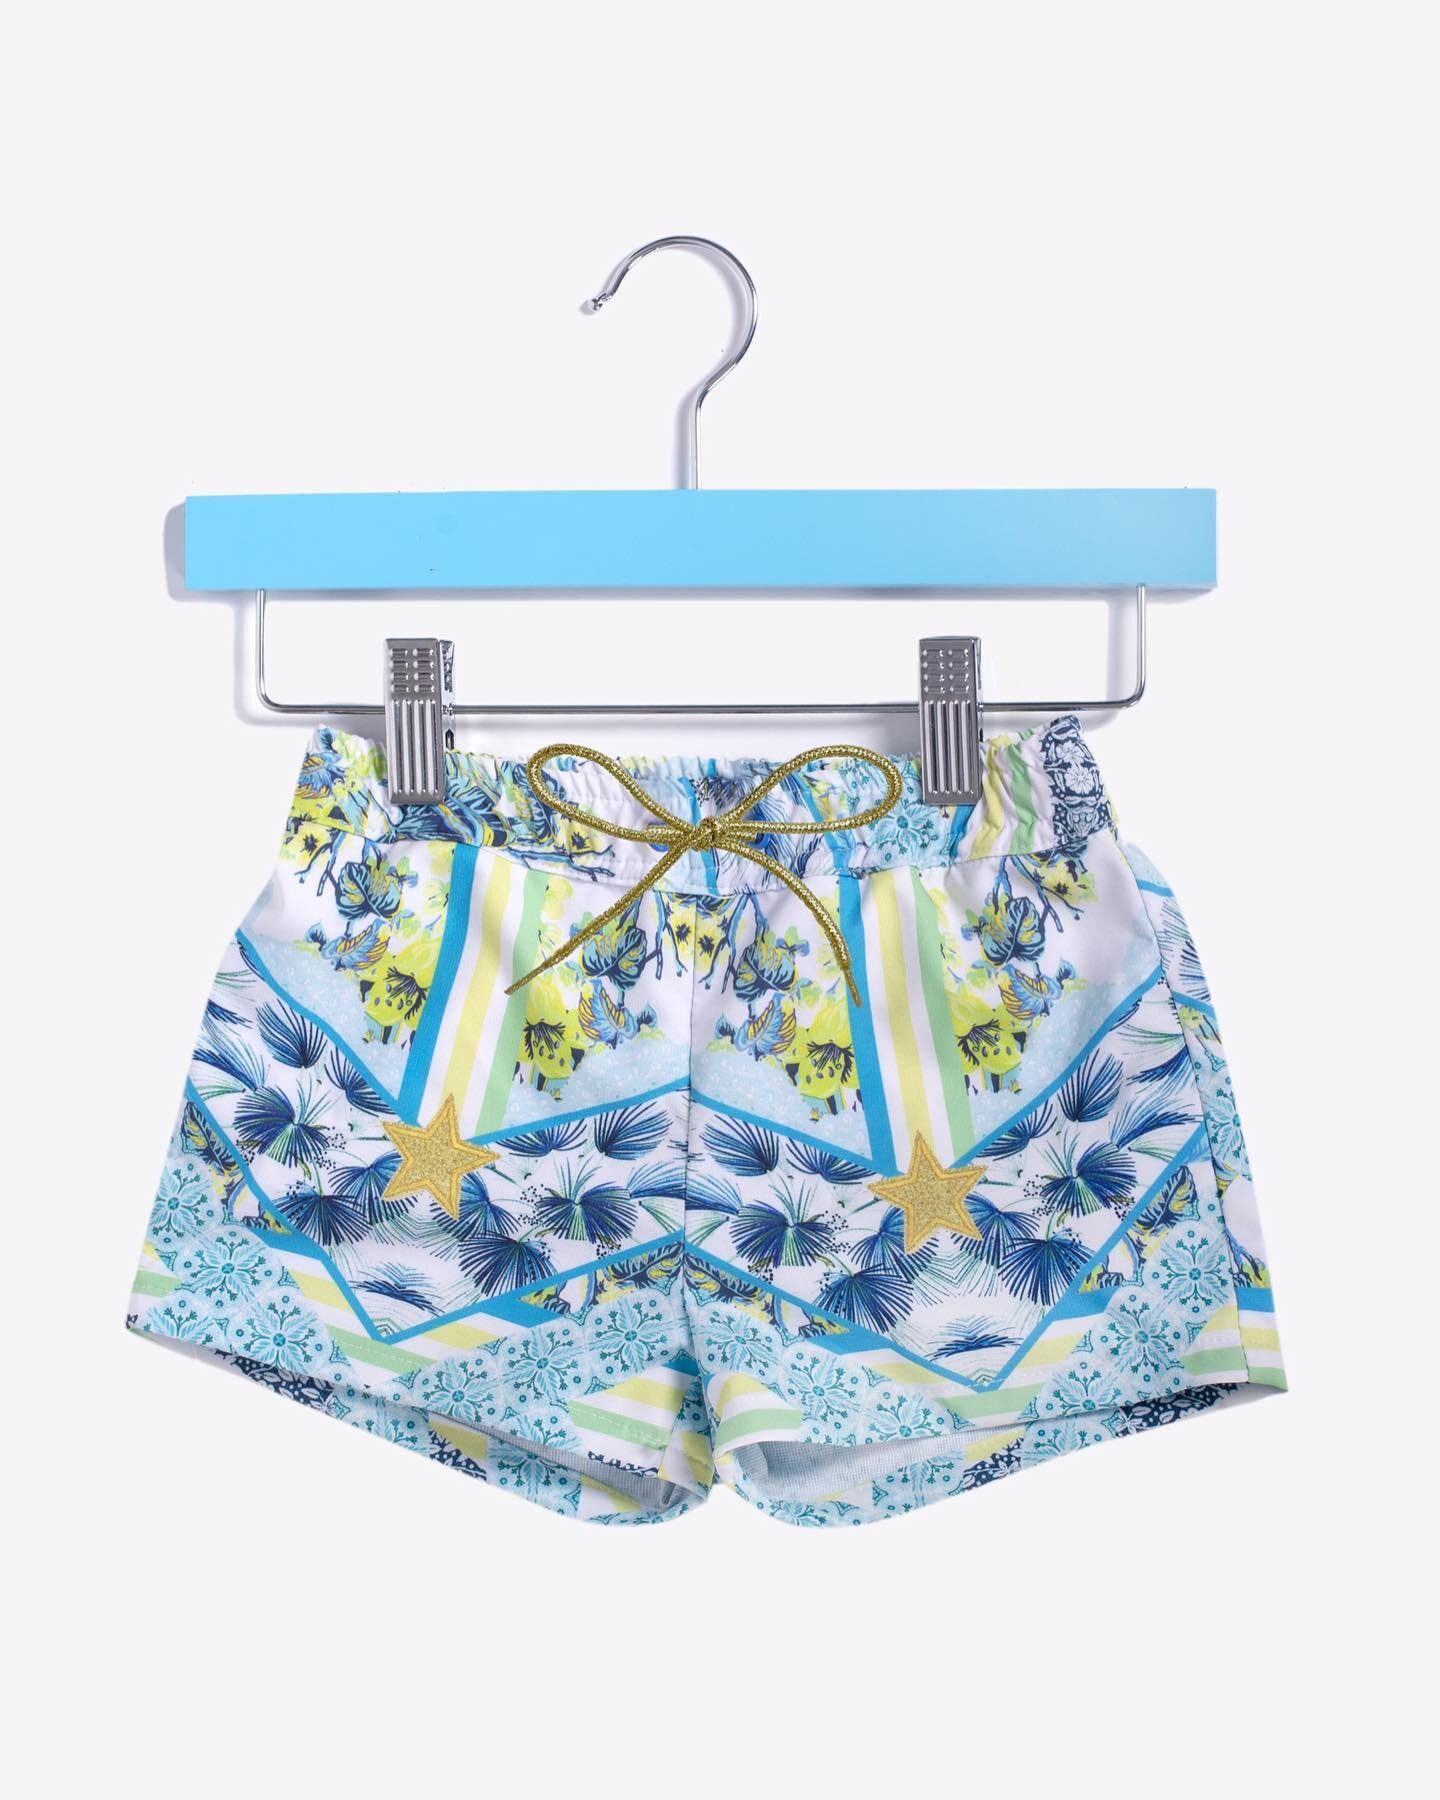 Boardshorts, ruffle one-pieces, reusable swim diapers &amp; rashguards/short sets, OH MY!

DM for details 🌴If we don&rsquo;t have your size in stock we can make it 🌟

#kidsswim #toddlerswimwear #kidsswimsuits #summer2022 #babyswim #kidsswimsuits #t